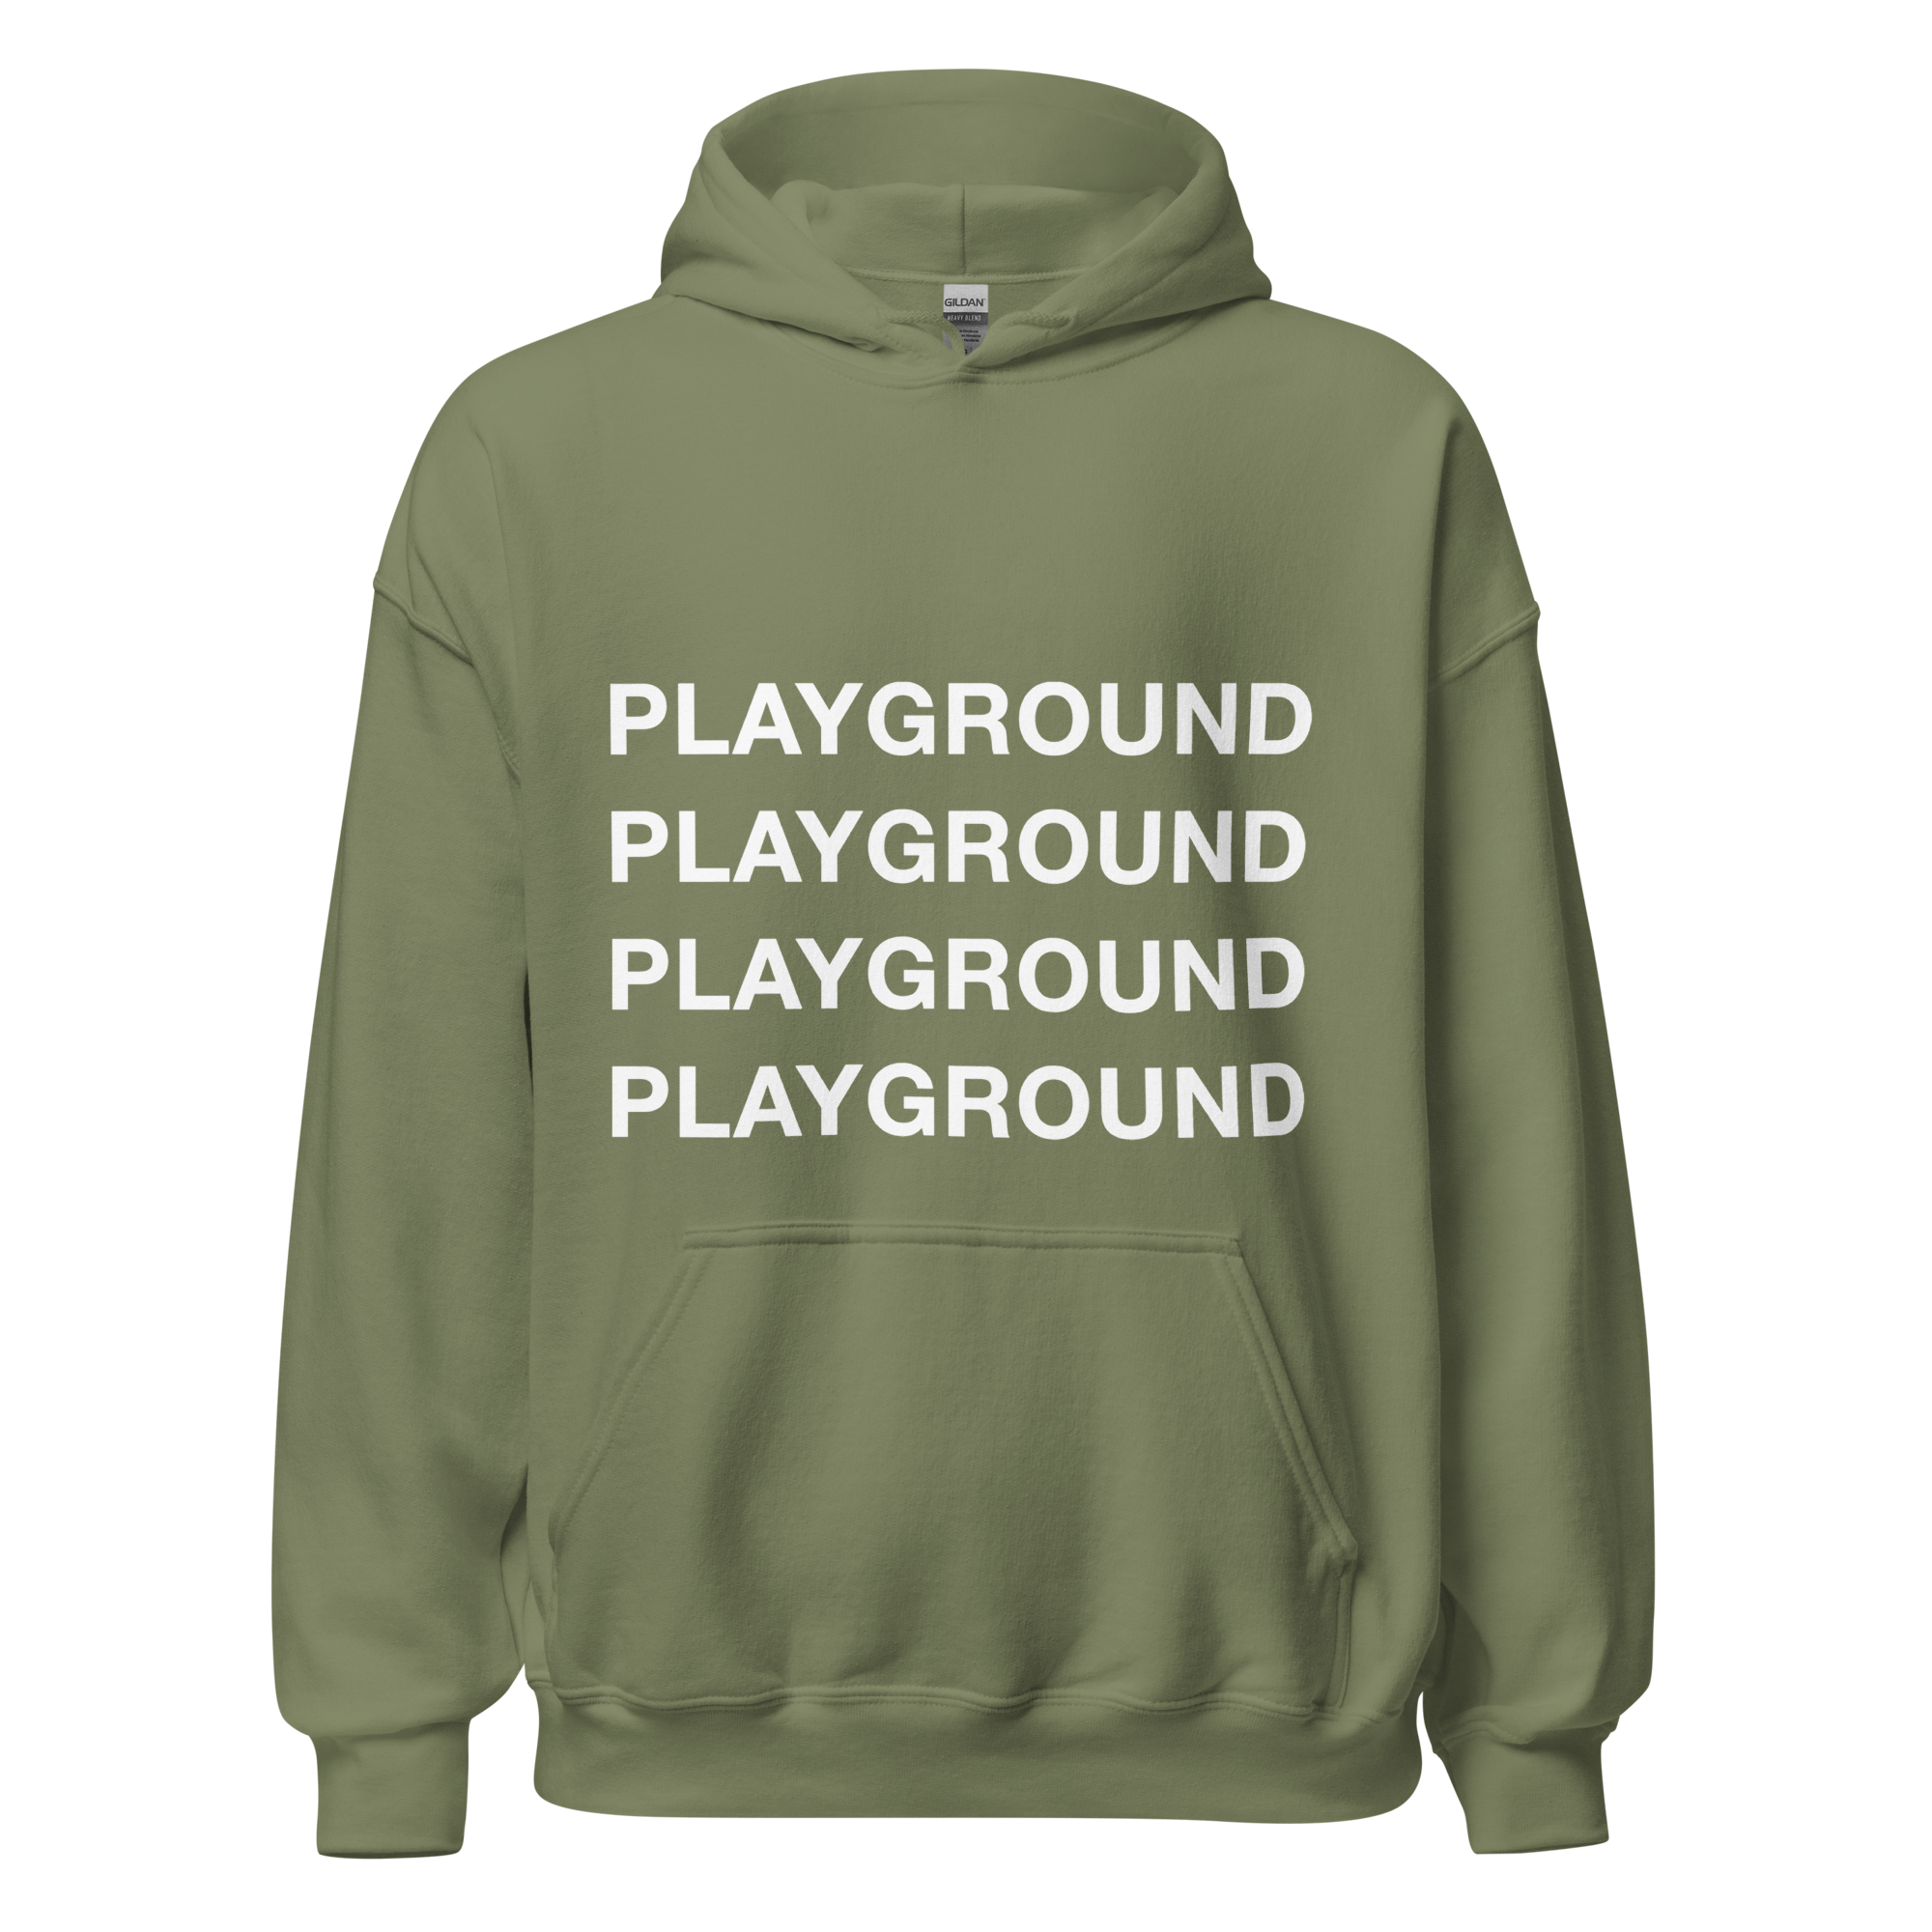 unisex-heavy-blend-hoodie-military-green-front-655bee2a05d44.png